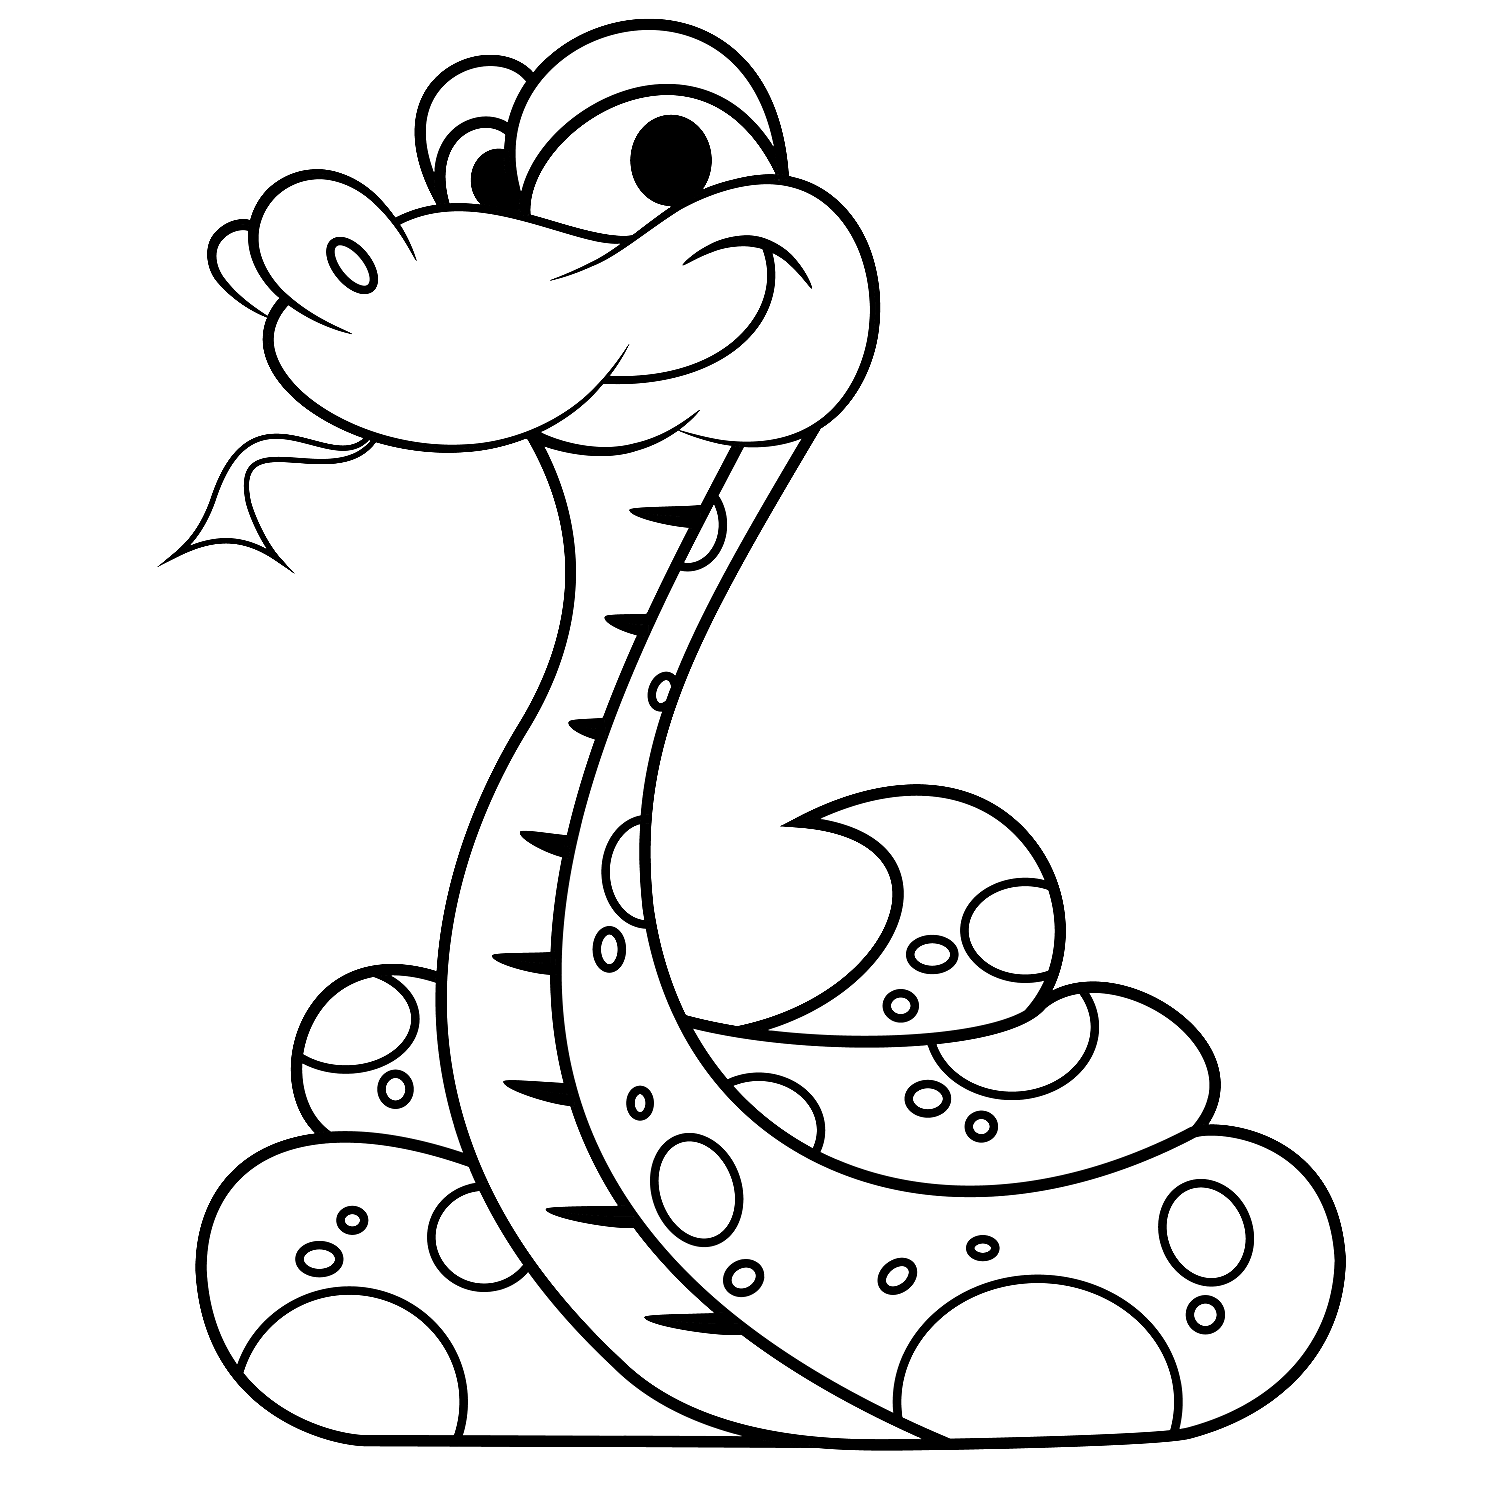 coloring page snake - High Quality Coloring Pages